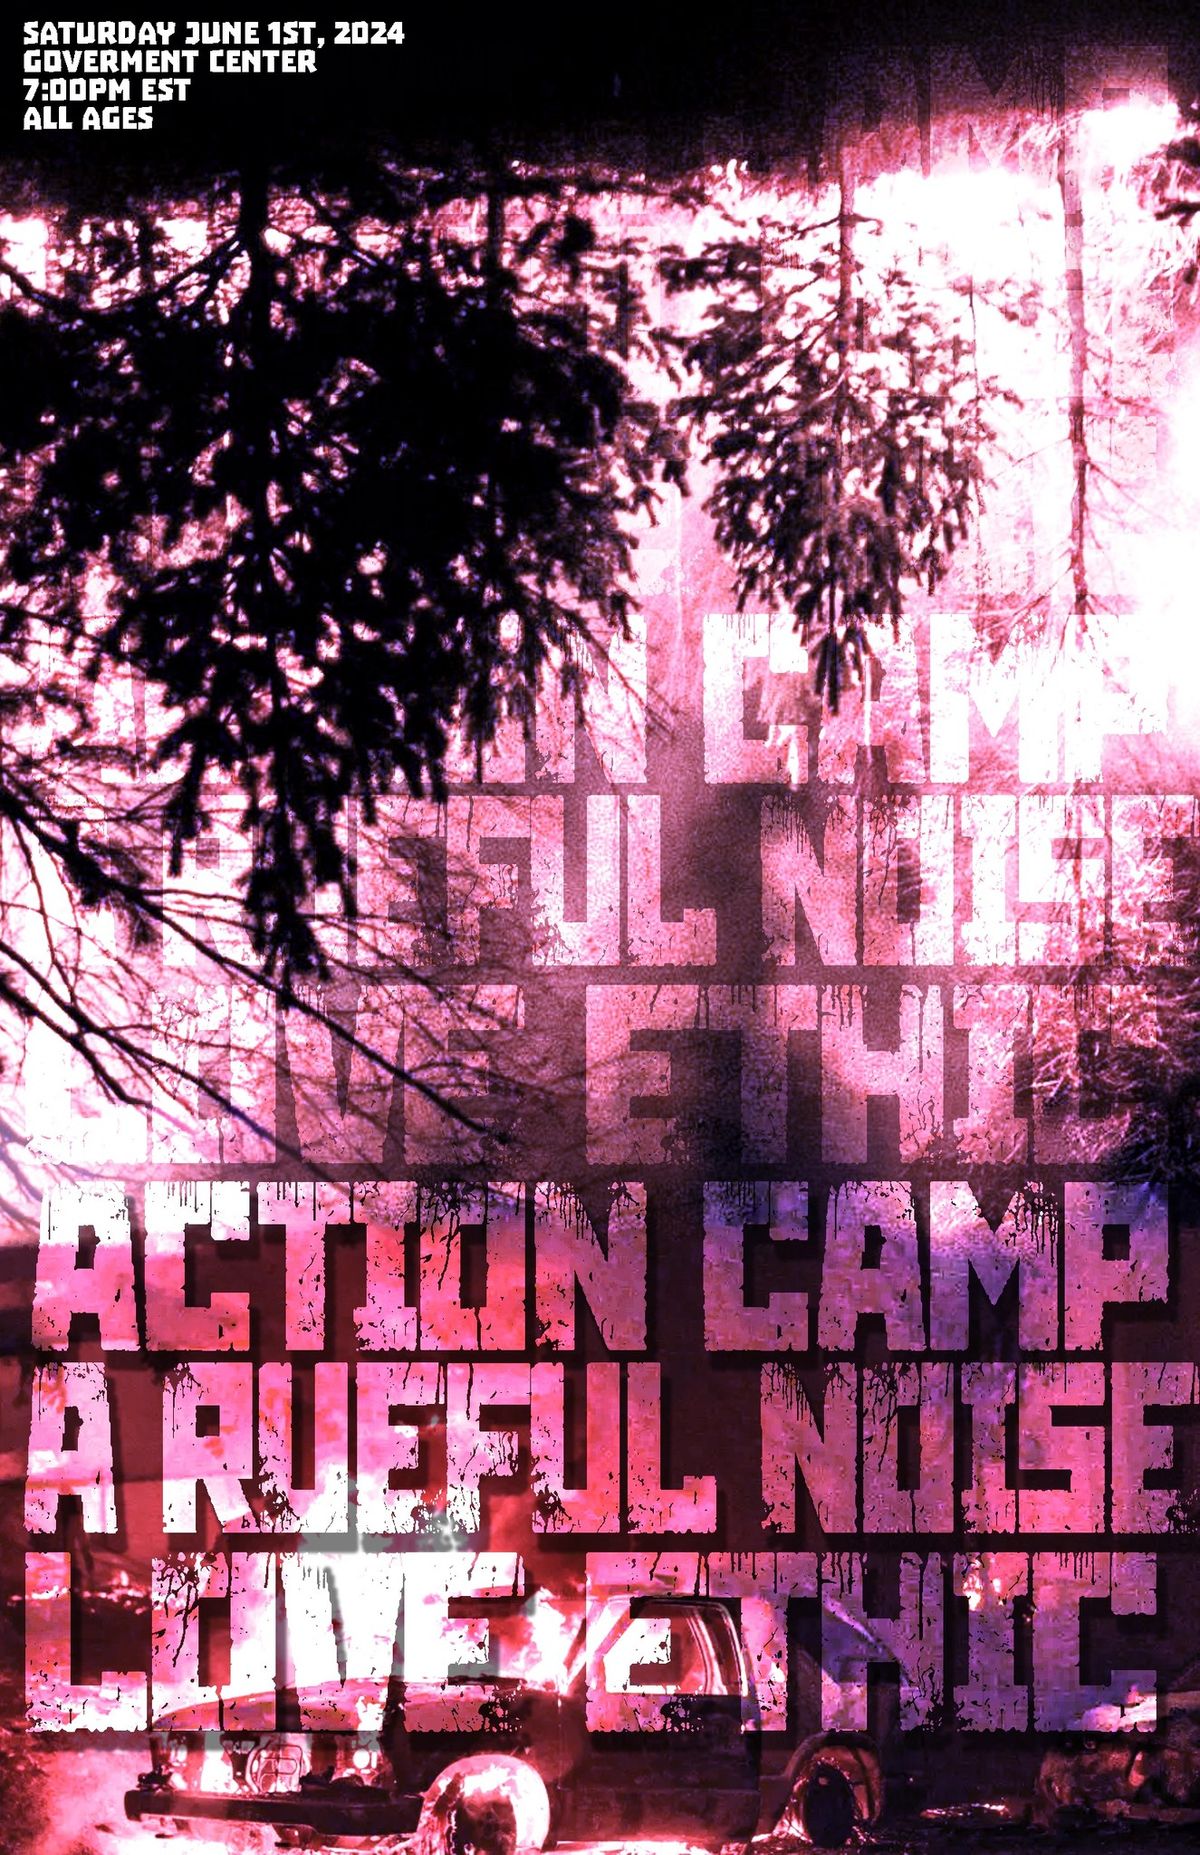 Action Camp + A Rueful Noise + Love Ethic